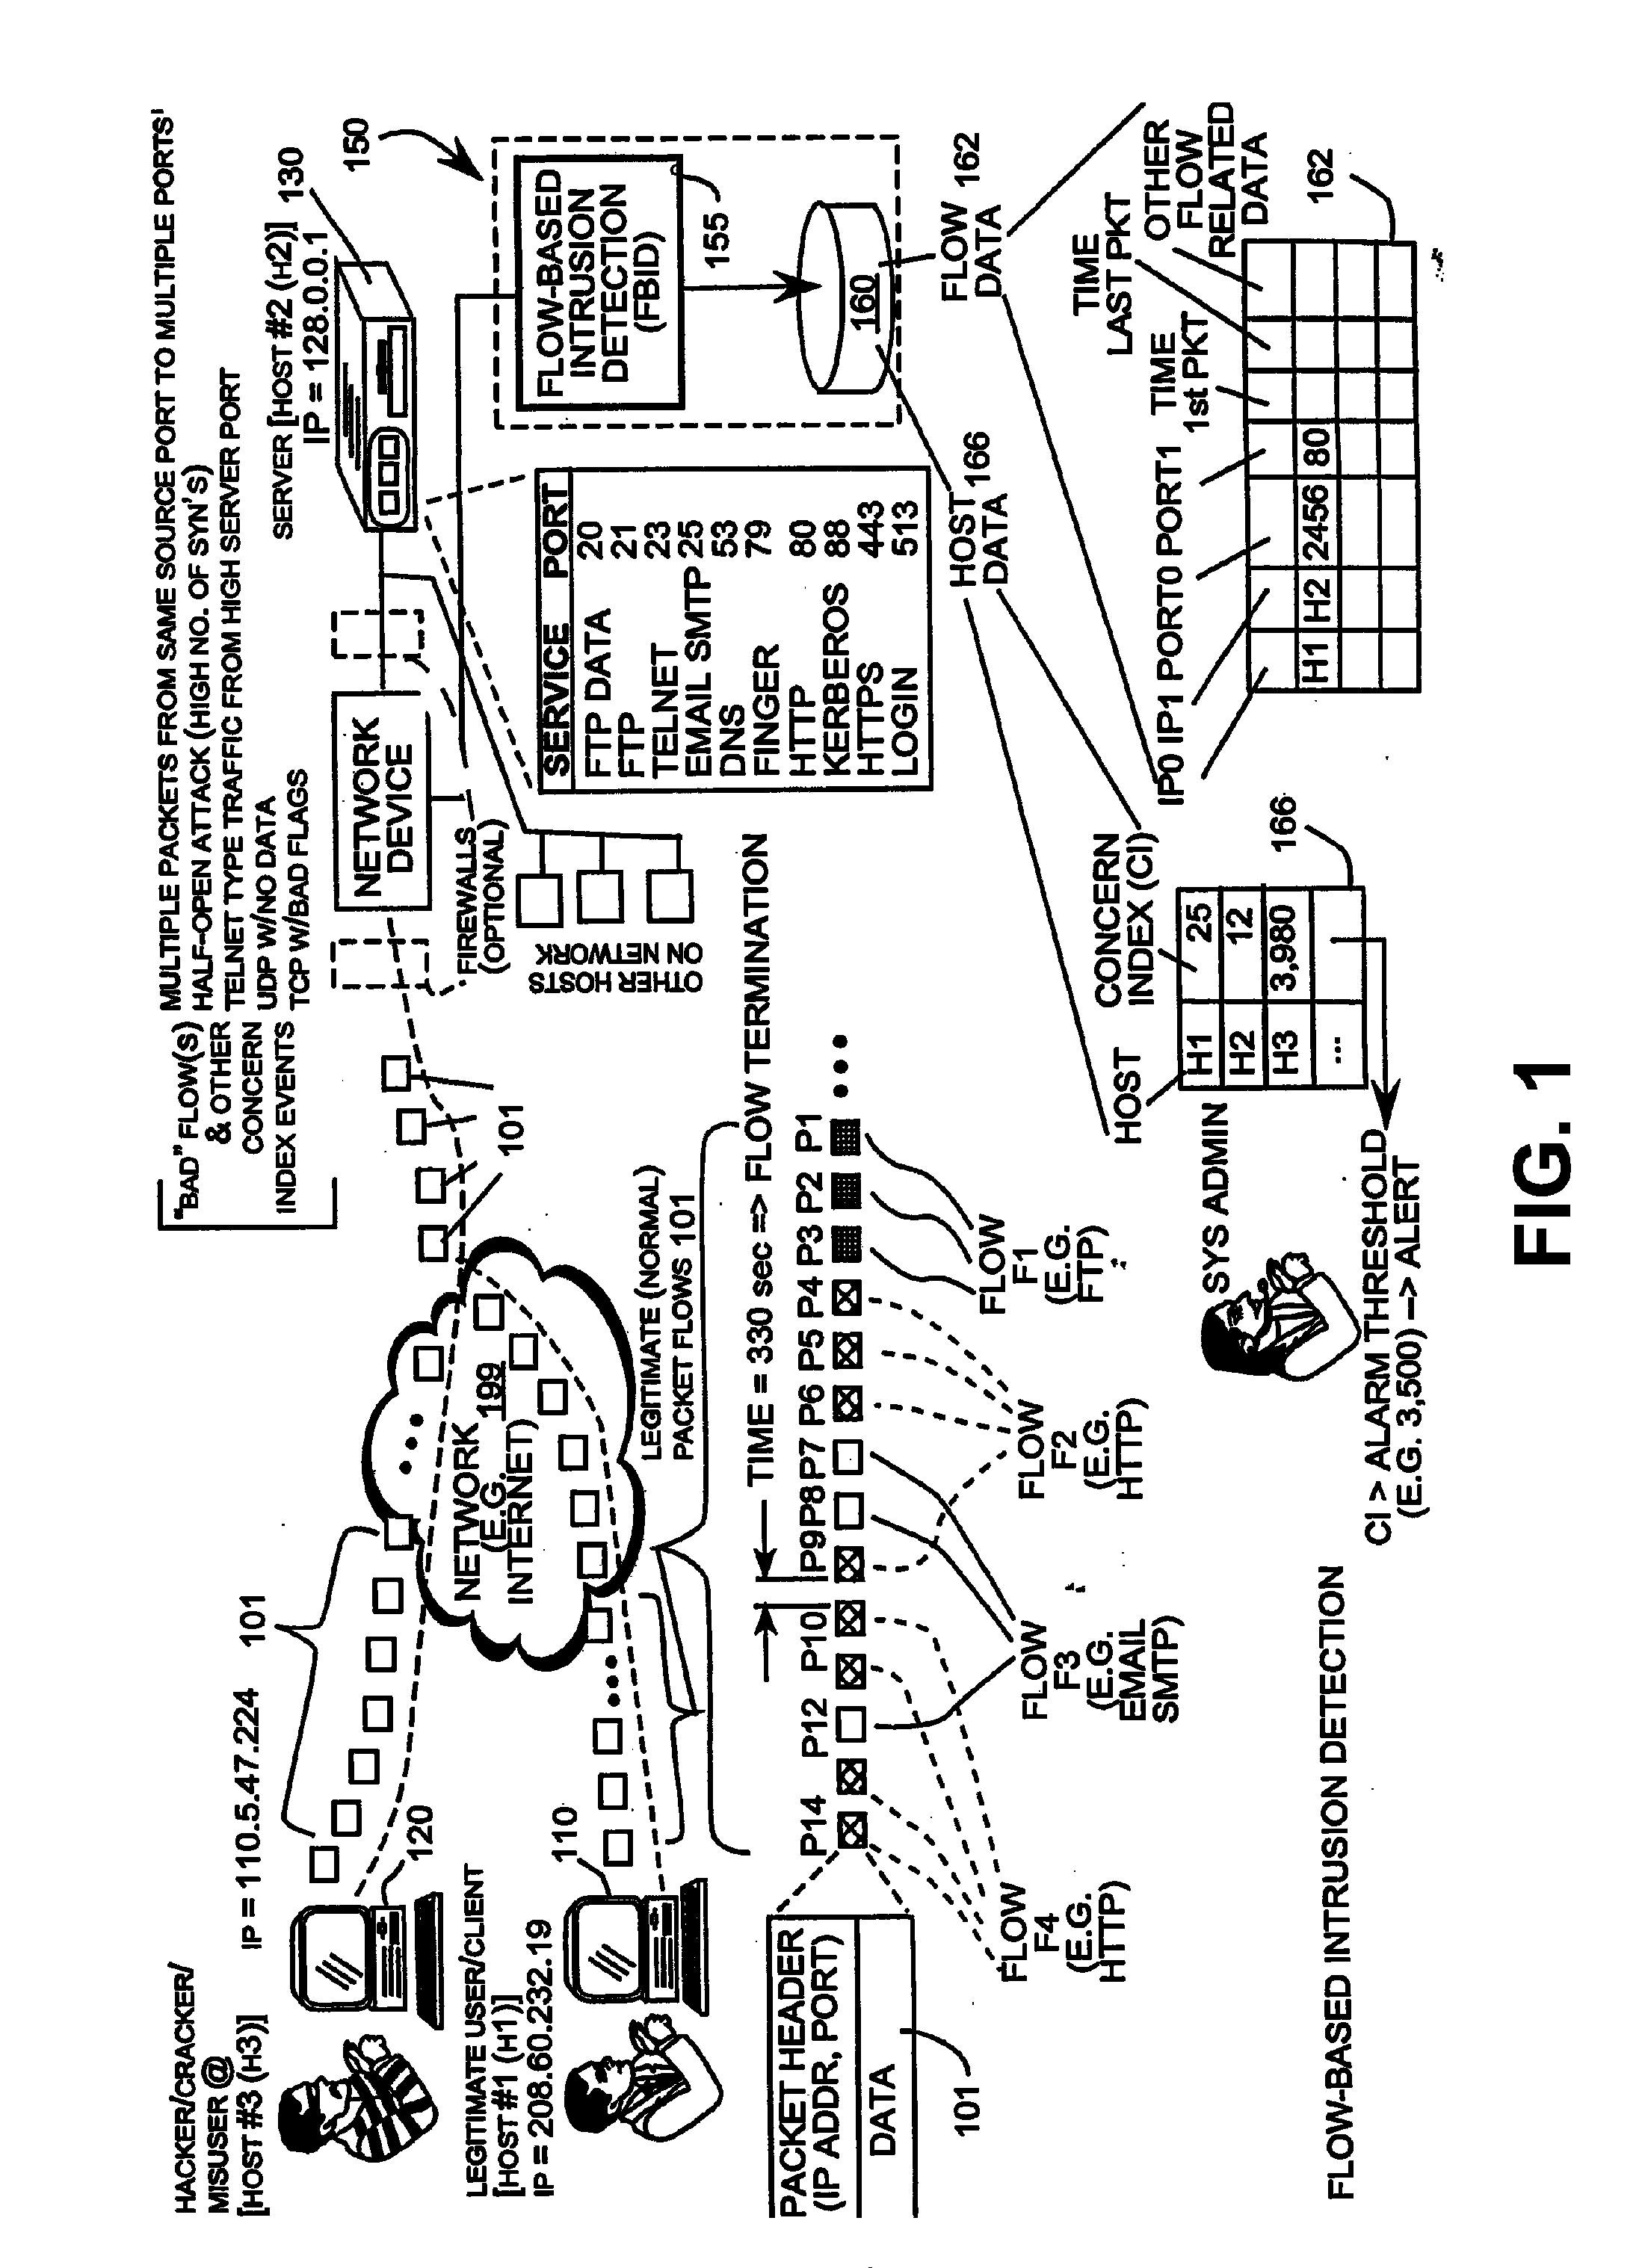 Packet Sampling Flow-Based Detection of Network Intrusions